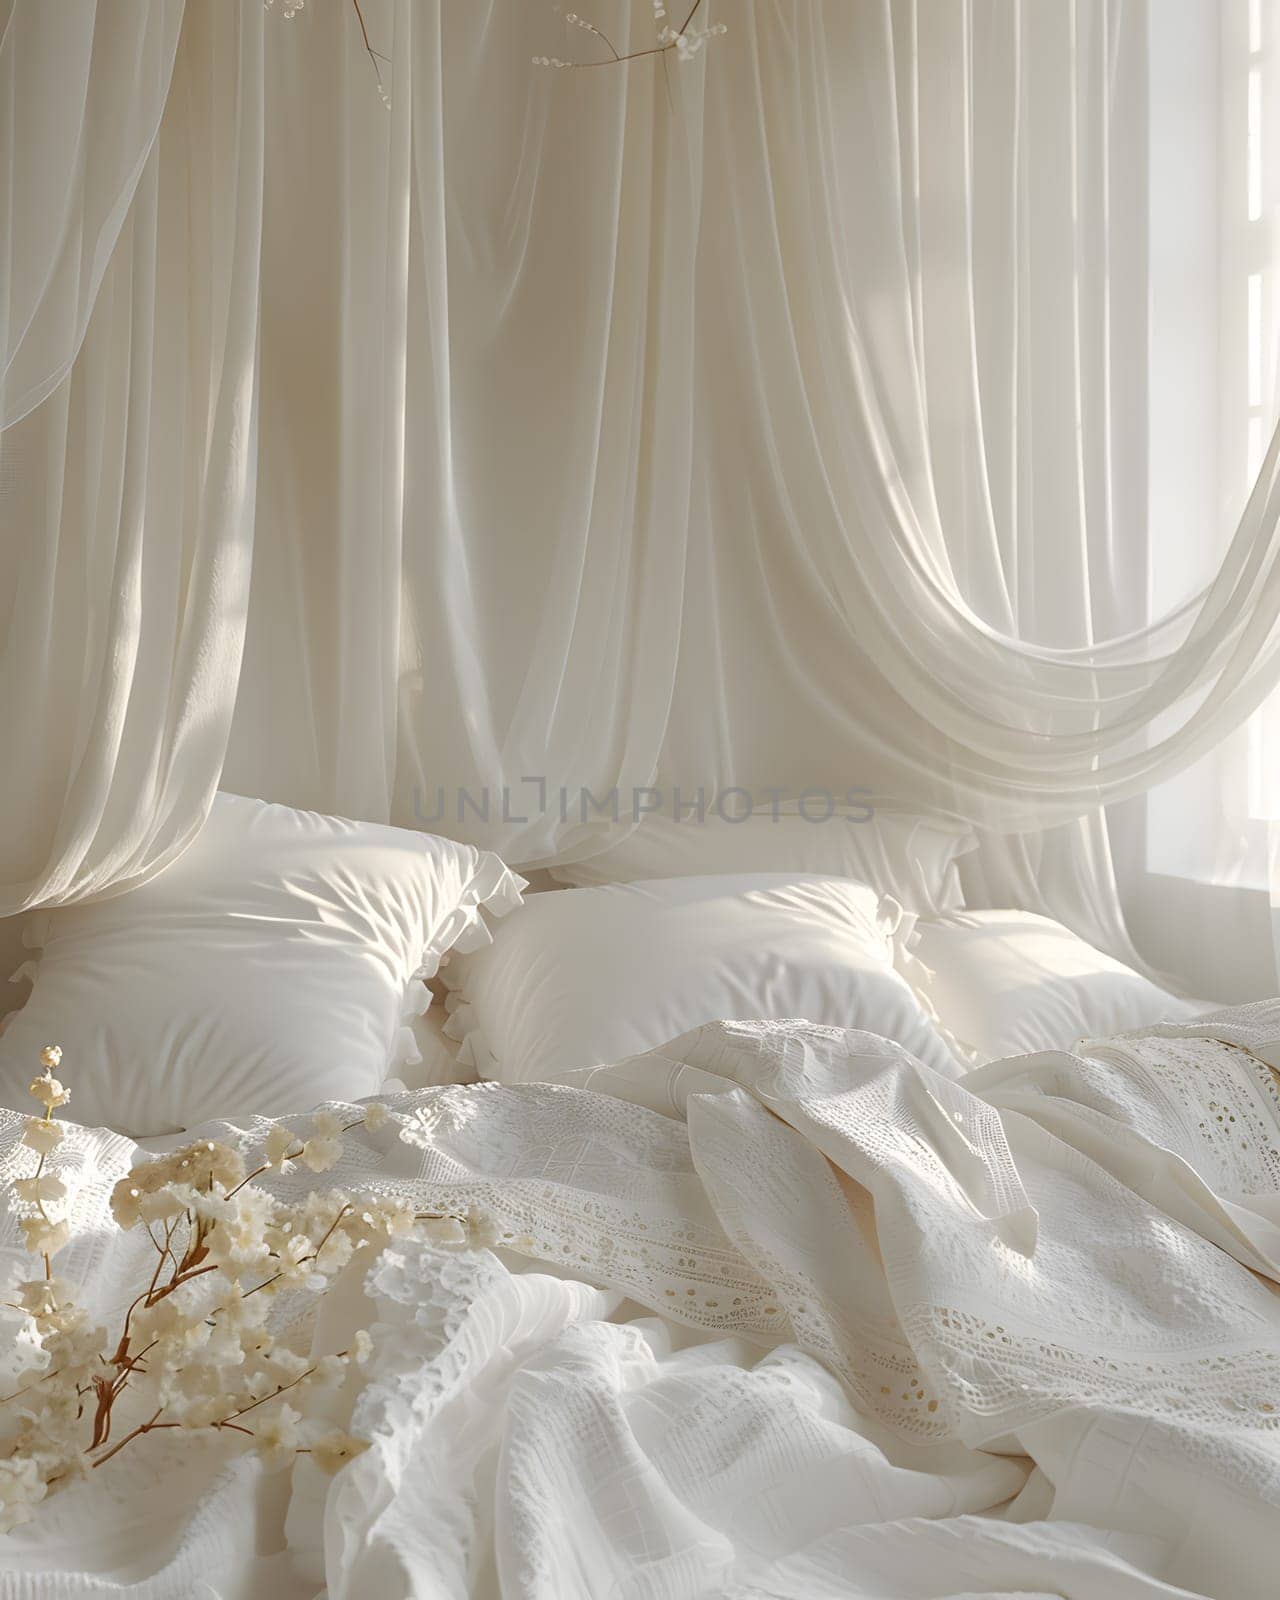 A canopy bed with white linens and pillows, surrounded by transparent curtain by Nadtochiy